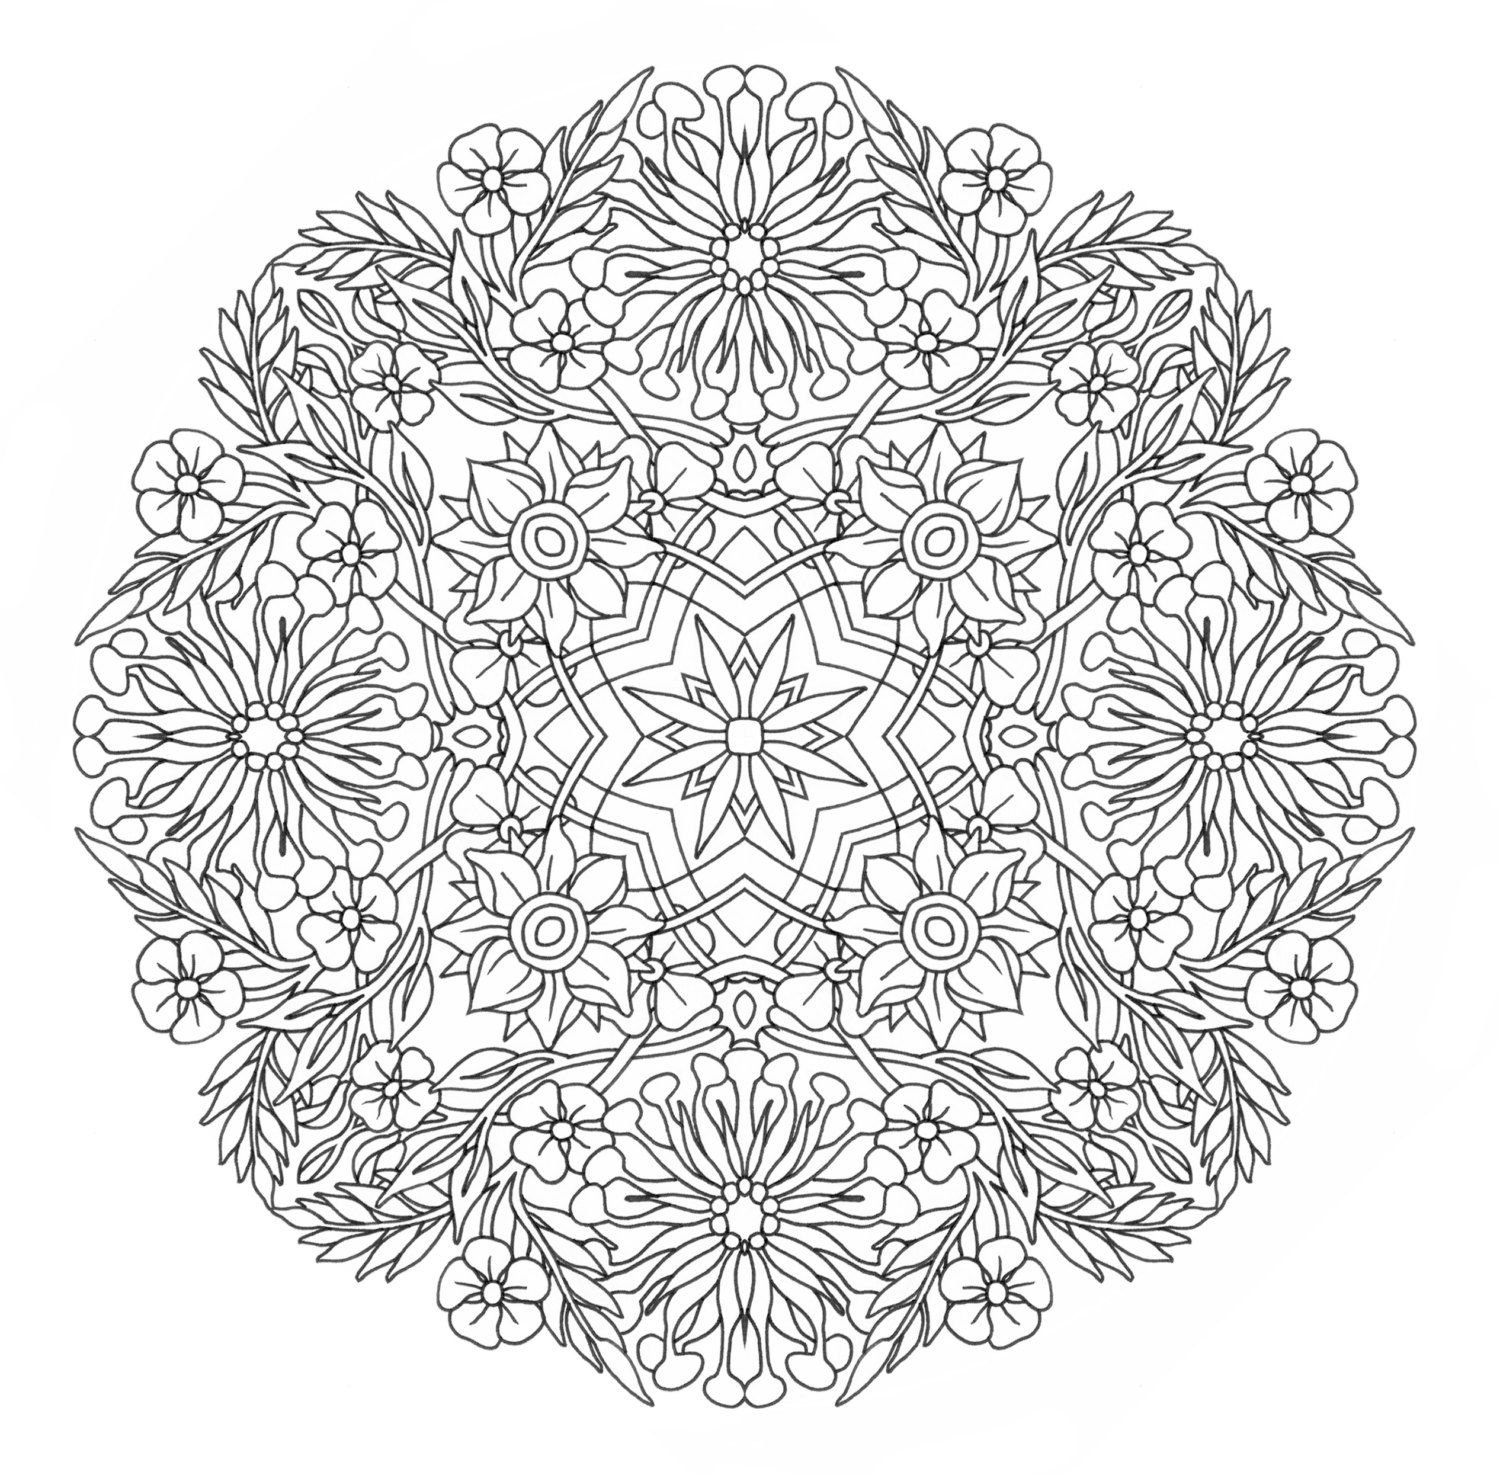 Free Mandala Coloring Pages Abstract 19 - VoteForVerde.com